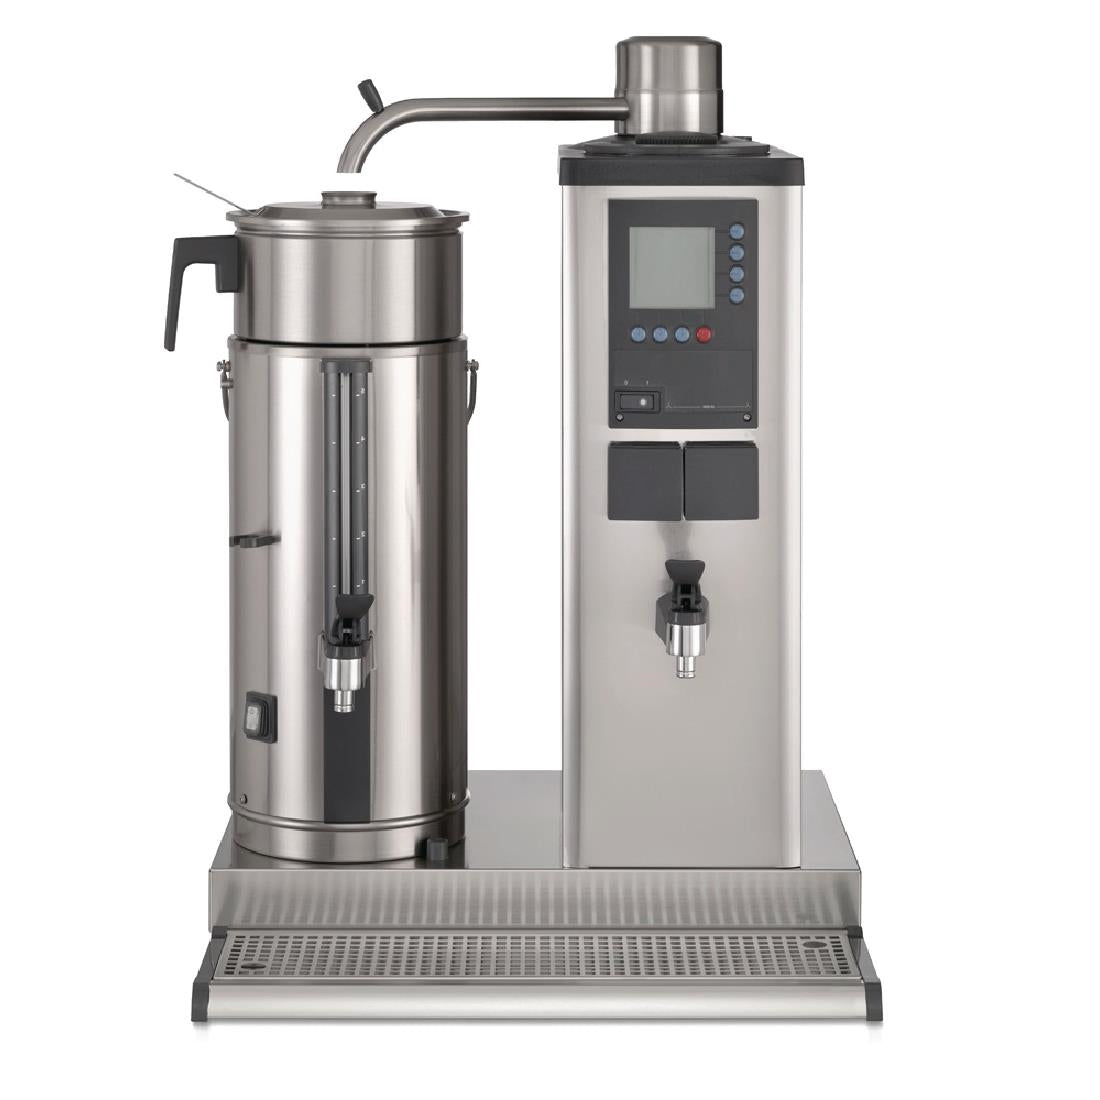 DC691 Bravilor B20 HWL Bulk Coffee Brewer with 20Ltr Coffee Urn and Hot Water Tap 3 Phase JD Catering Equipment Solutions Ltd